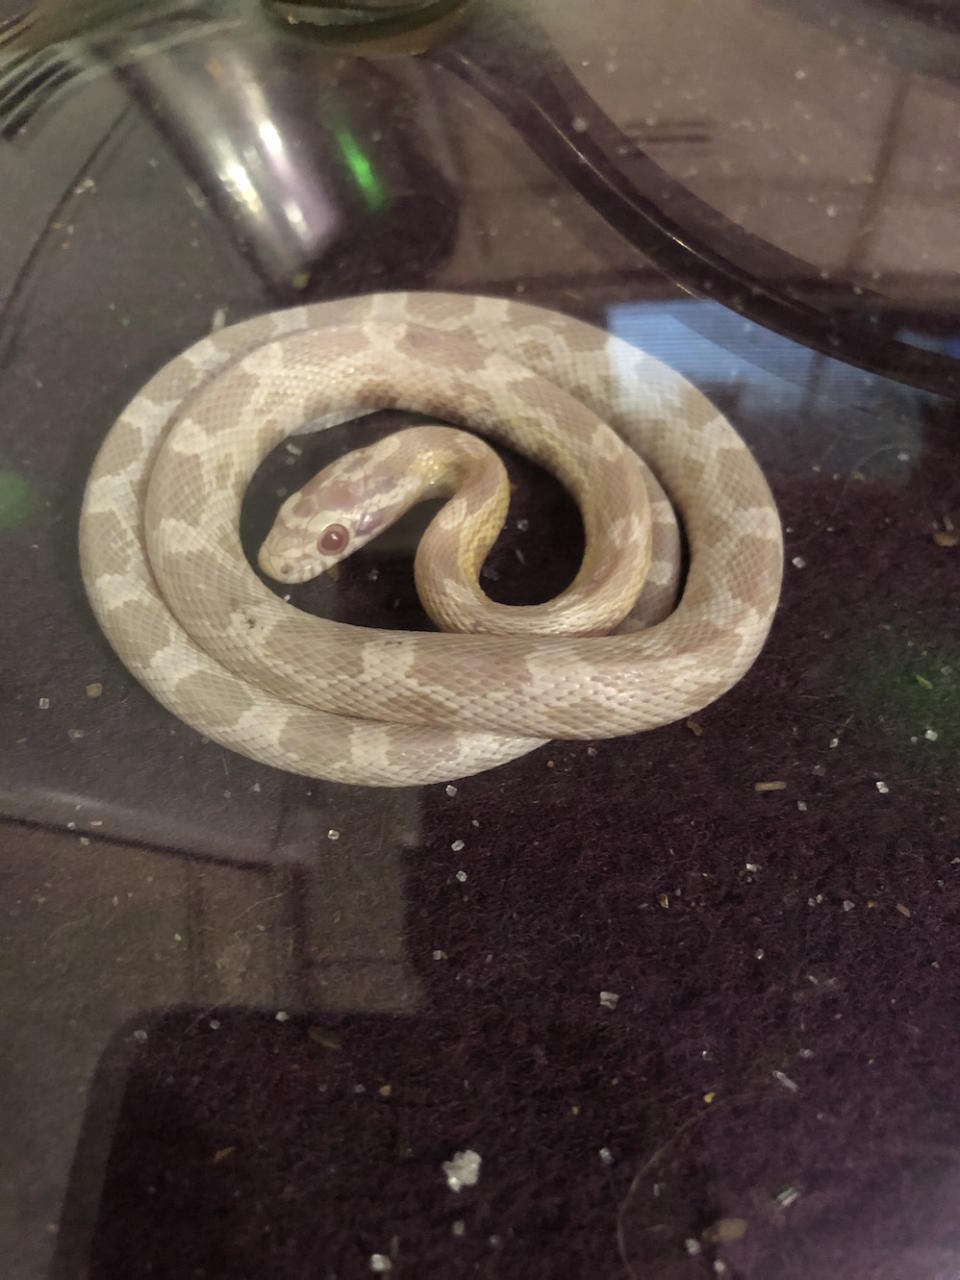 Barry Downes trapped the snake under a saucepan lid (Picture: RSPCA)